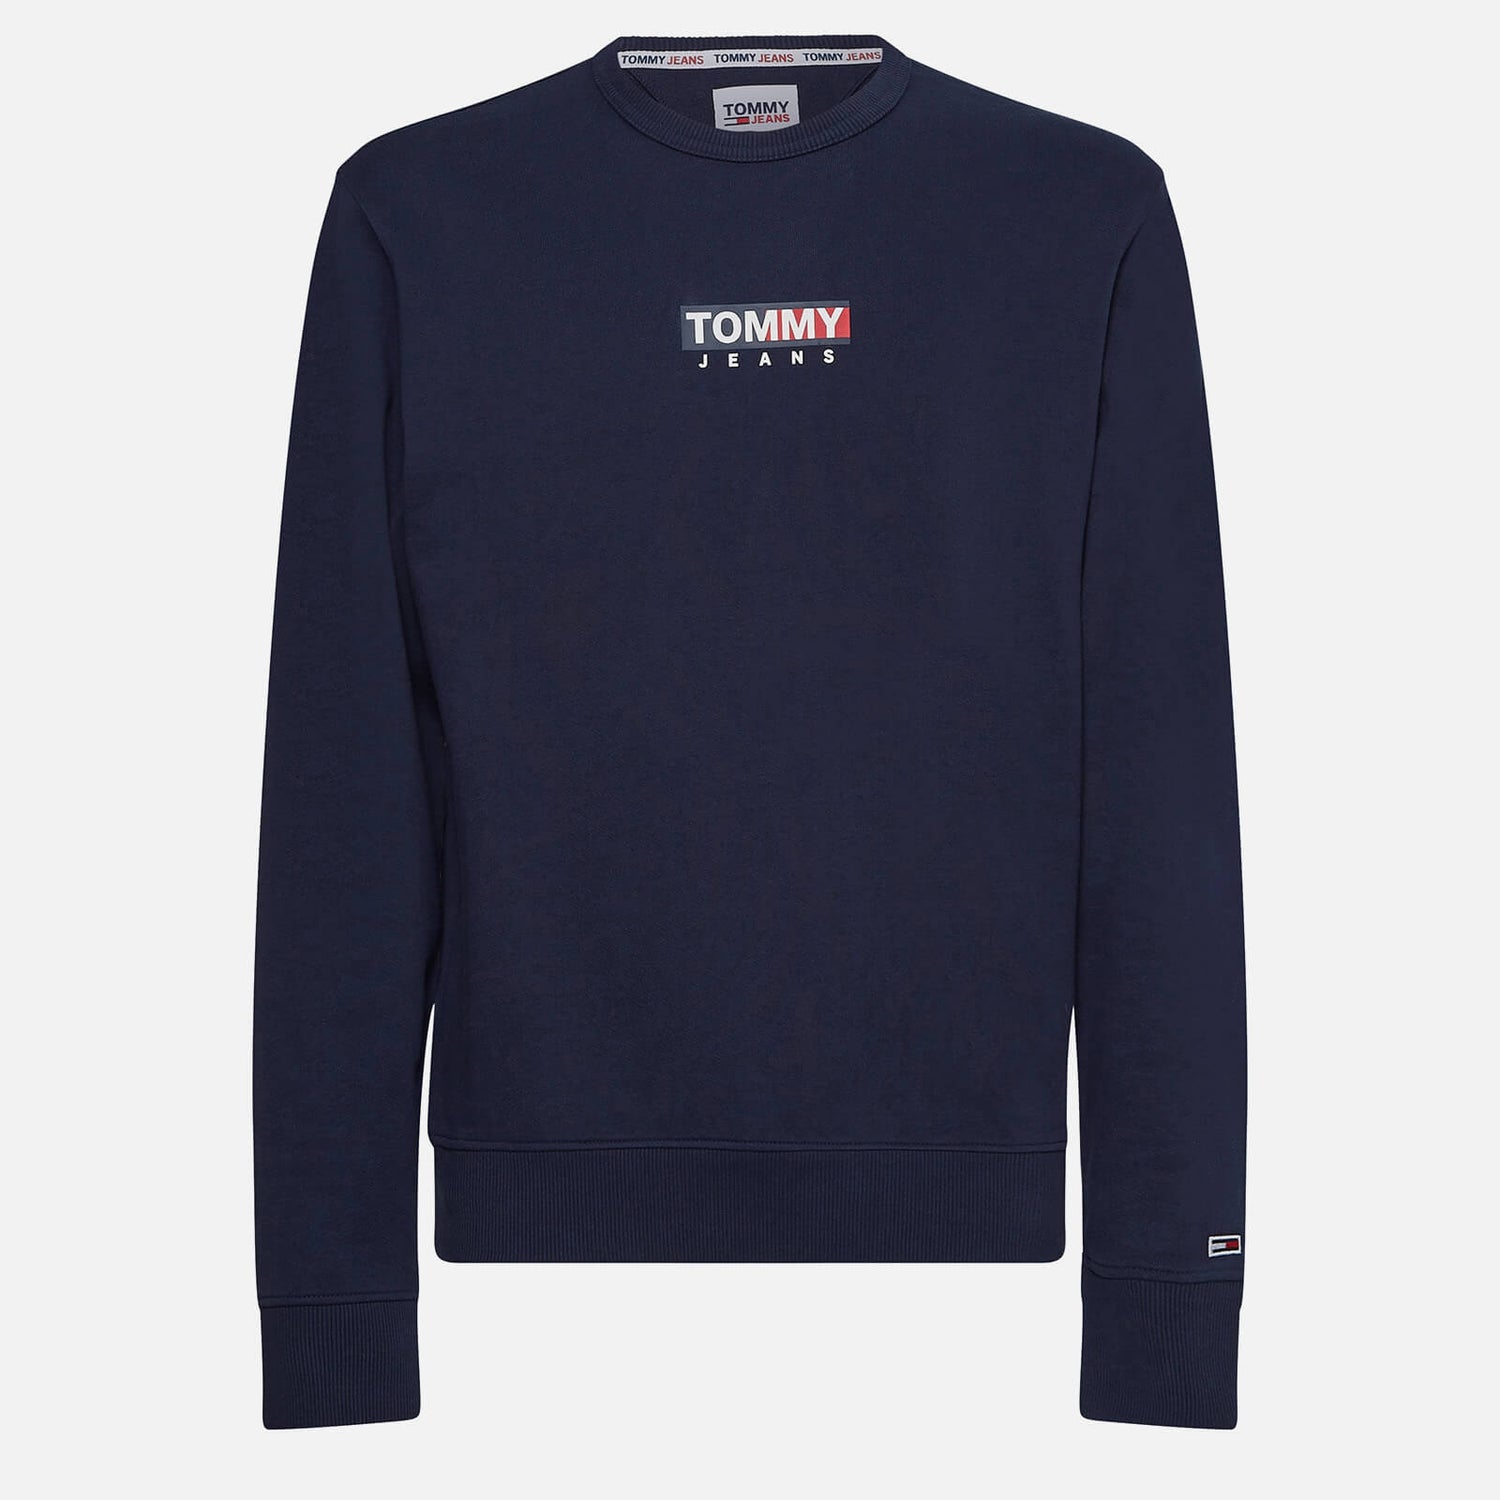 Tommy Jeans Men's Entry Graphic Sweatshirt - Twilight Navy - XL